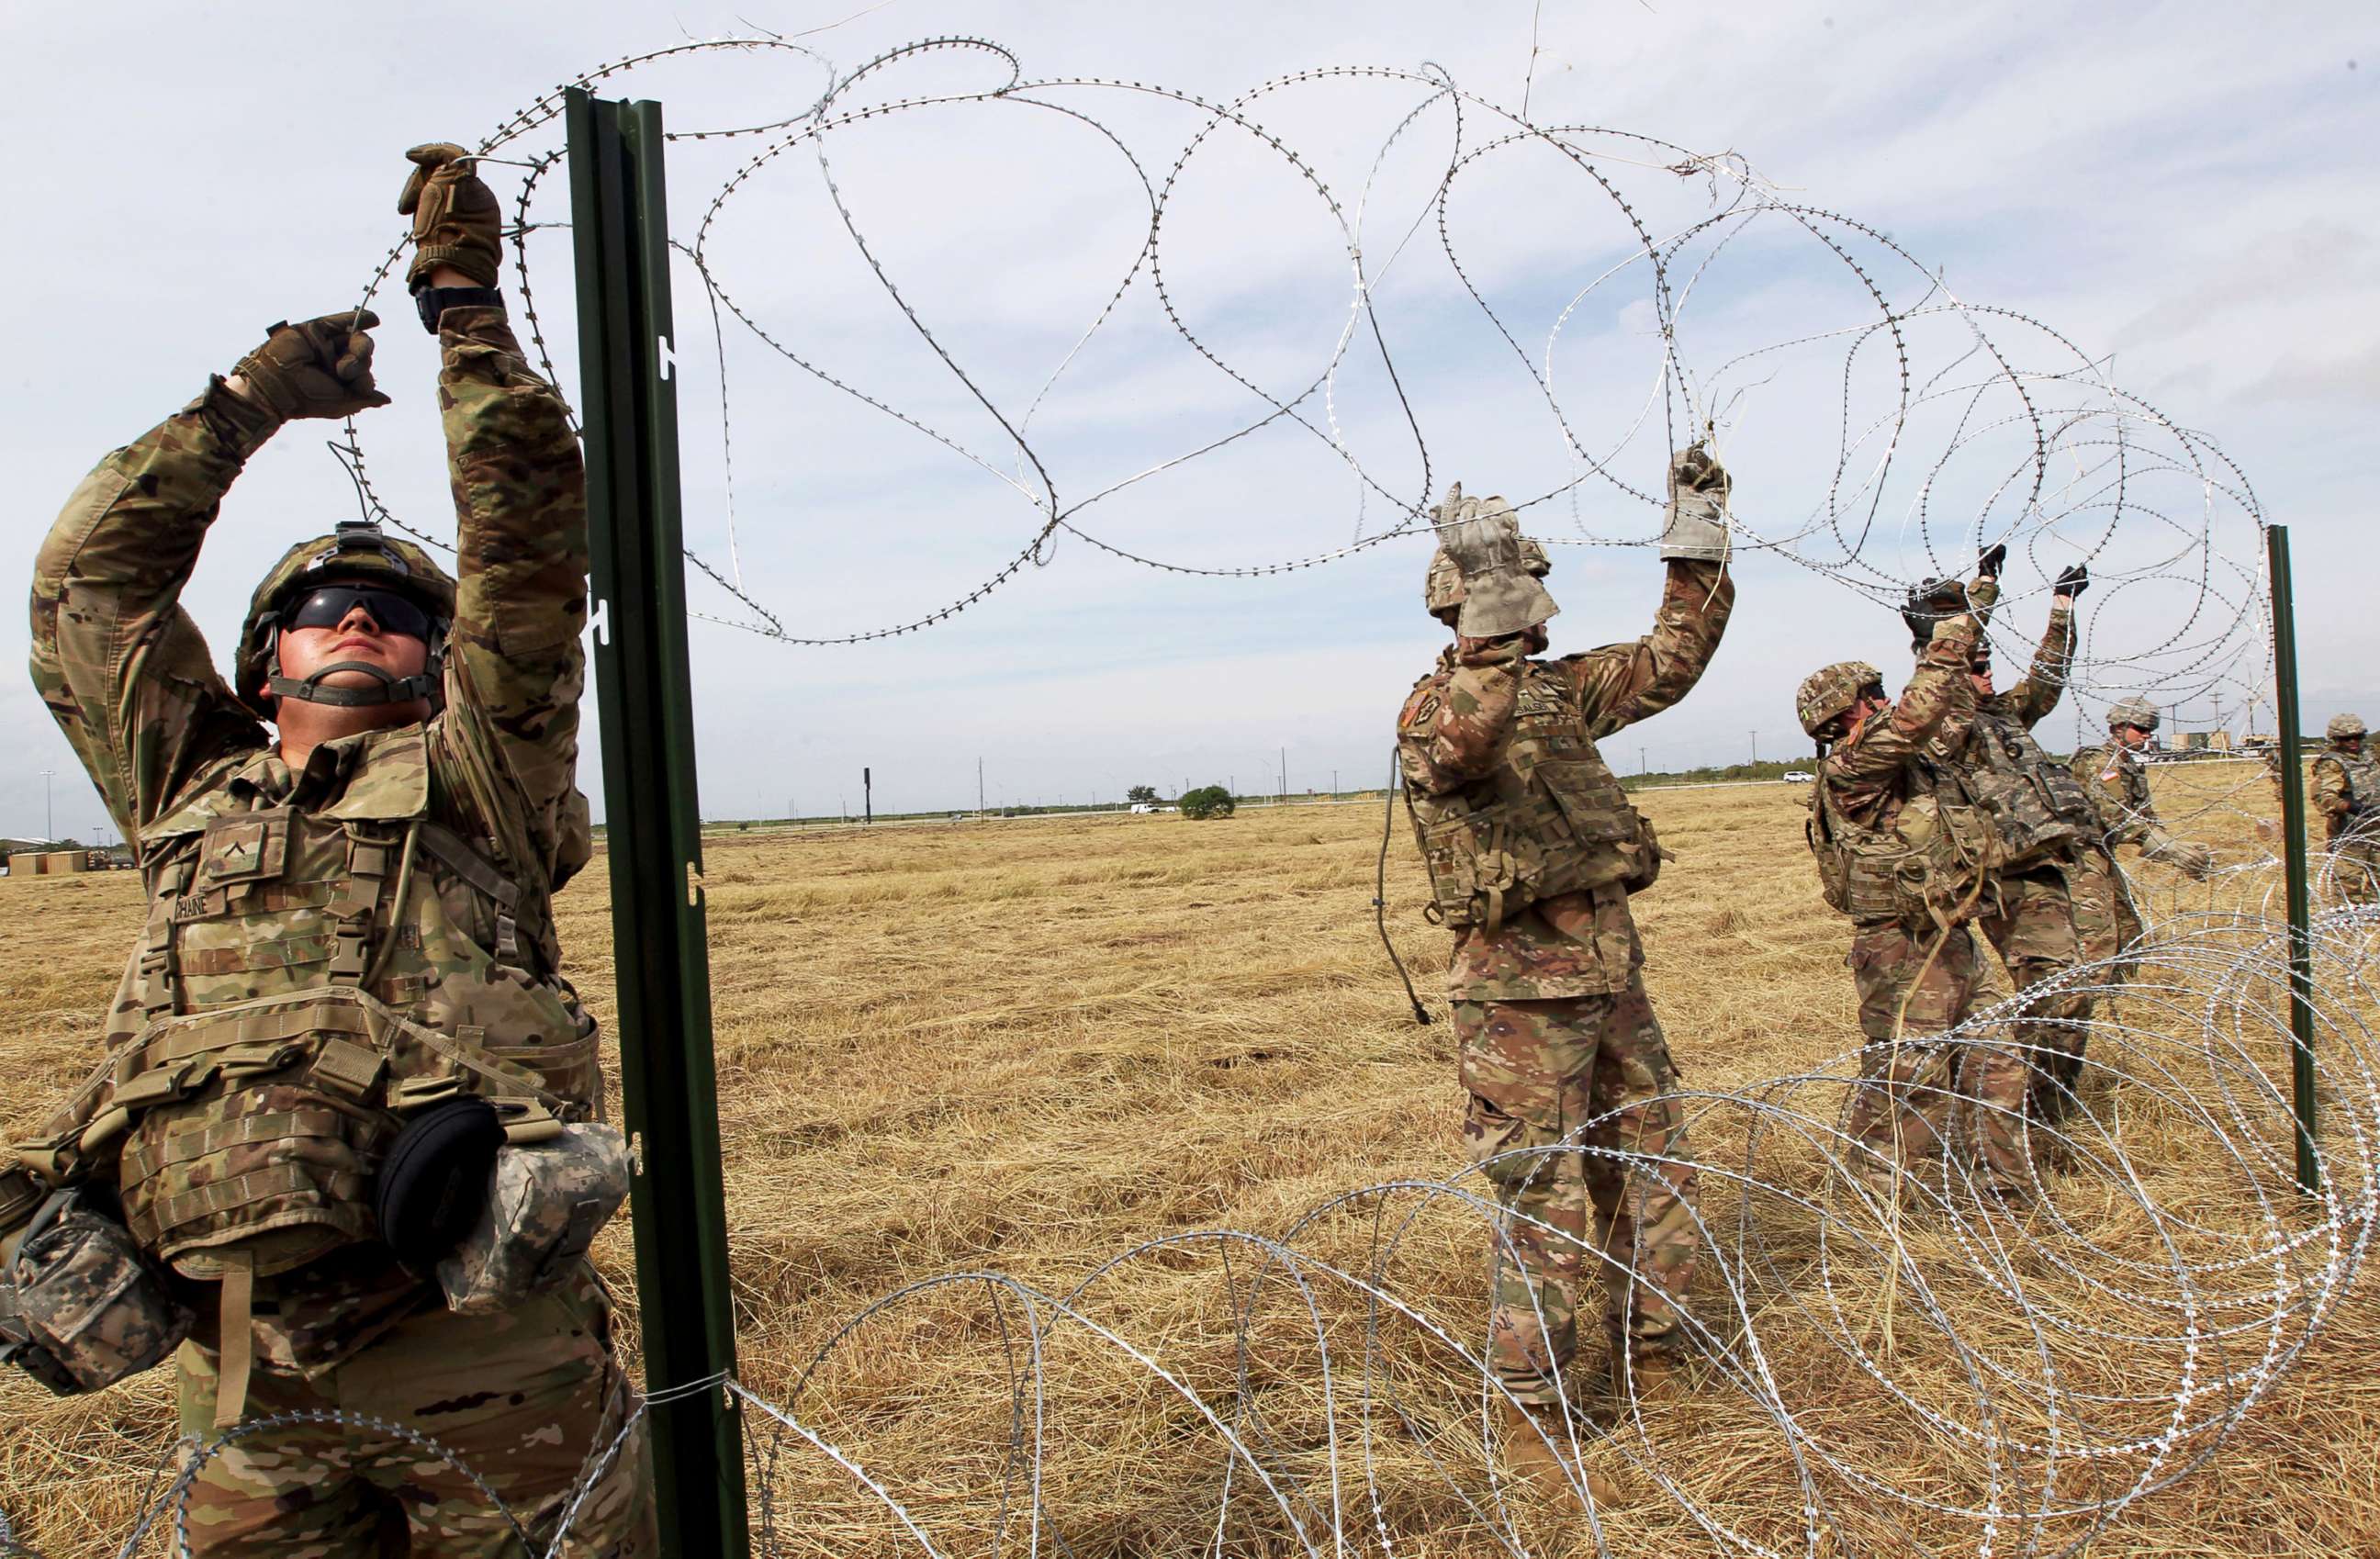 PHOTO: Army soldiers from Ft. Riley, Kansas, put up razor wire fence for an encampment to be used by the military near the U.S. Mexico border in Donna, Texas, Nov. 4, 2018.